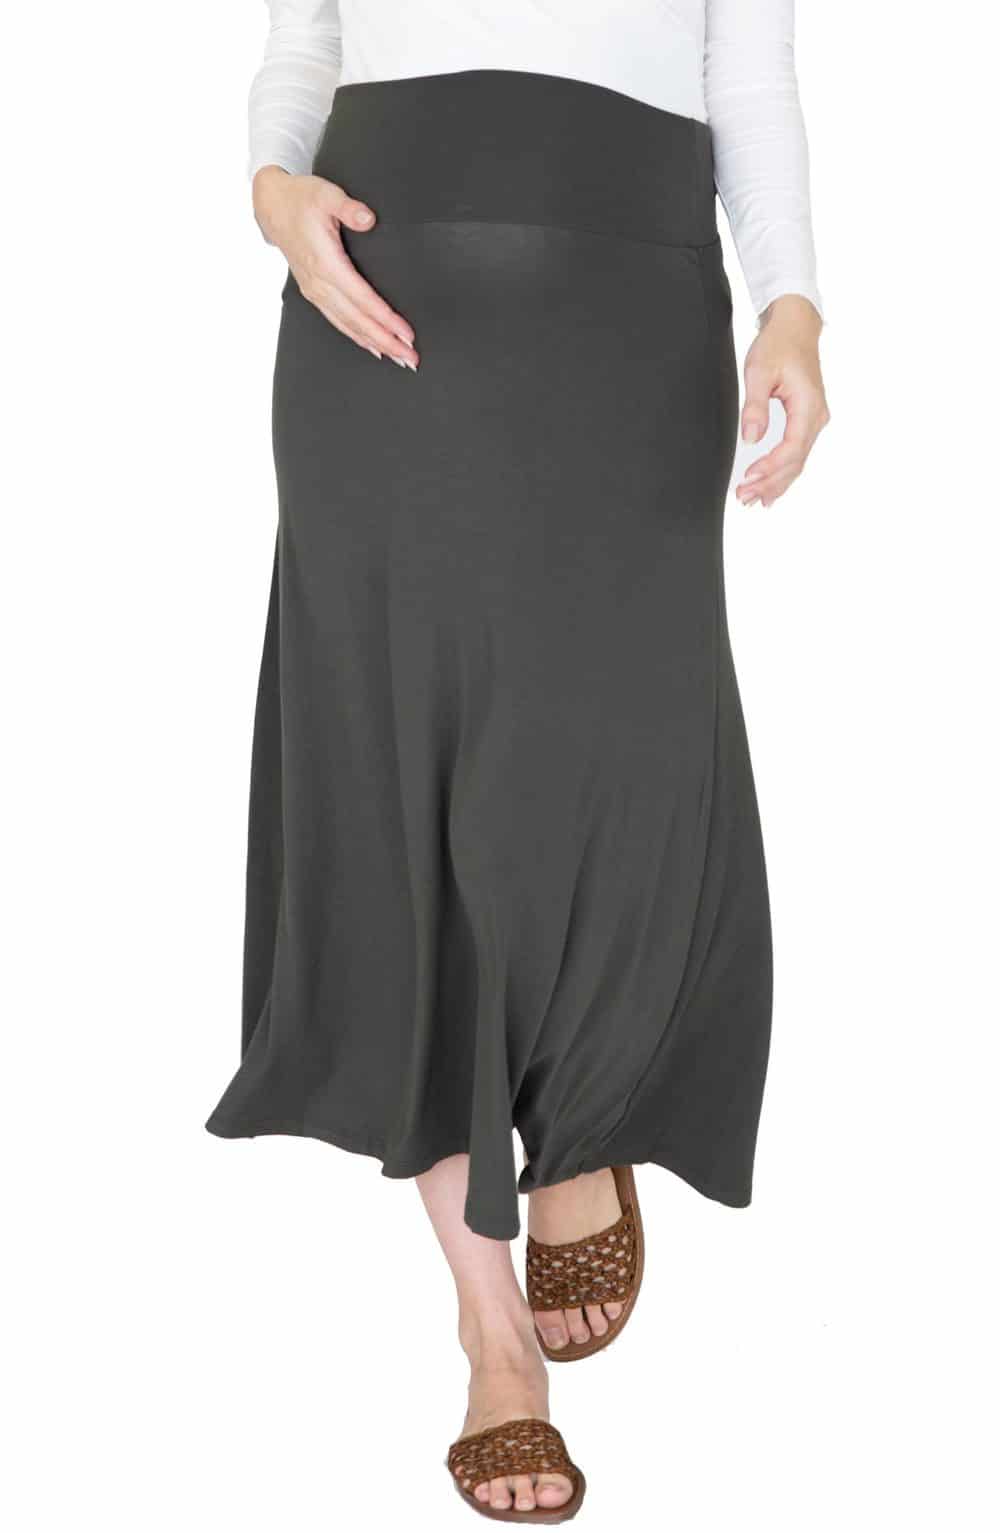 Womens Clothing Skirts Maxi skirts Isabella Oliver Synthetic Dawn Maternity Skirt With Lenzingtm Ecoverotm in Black 